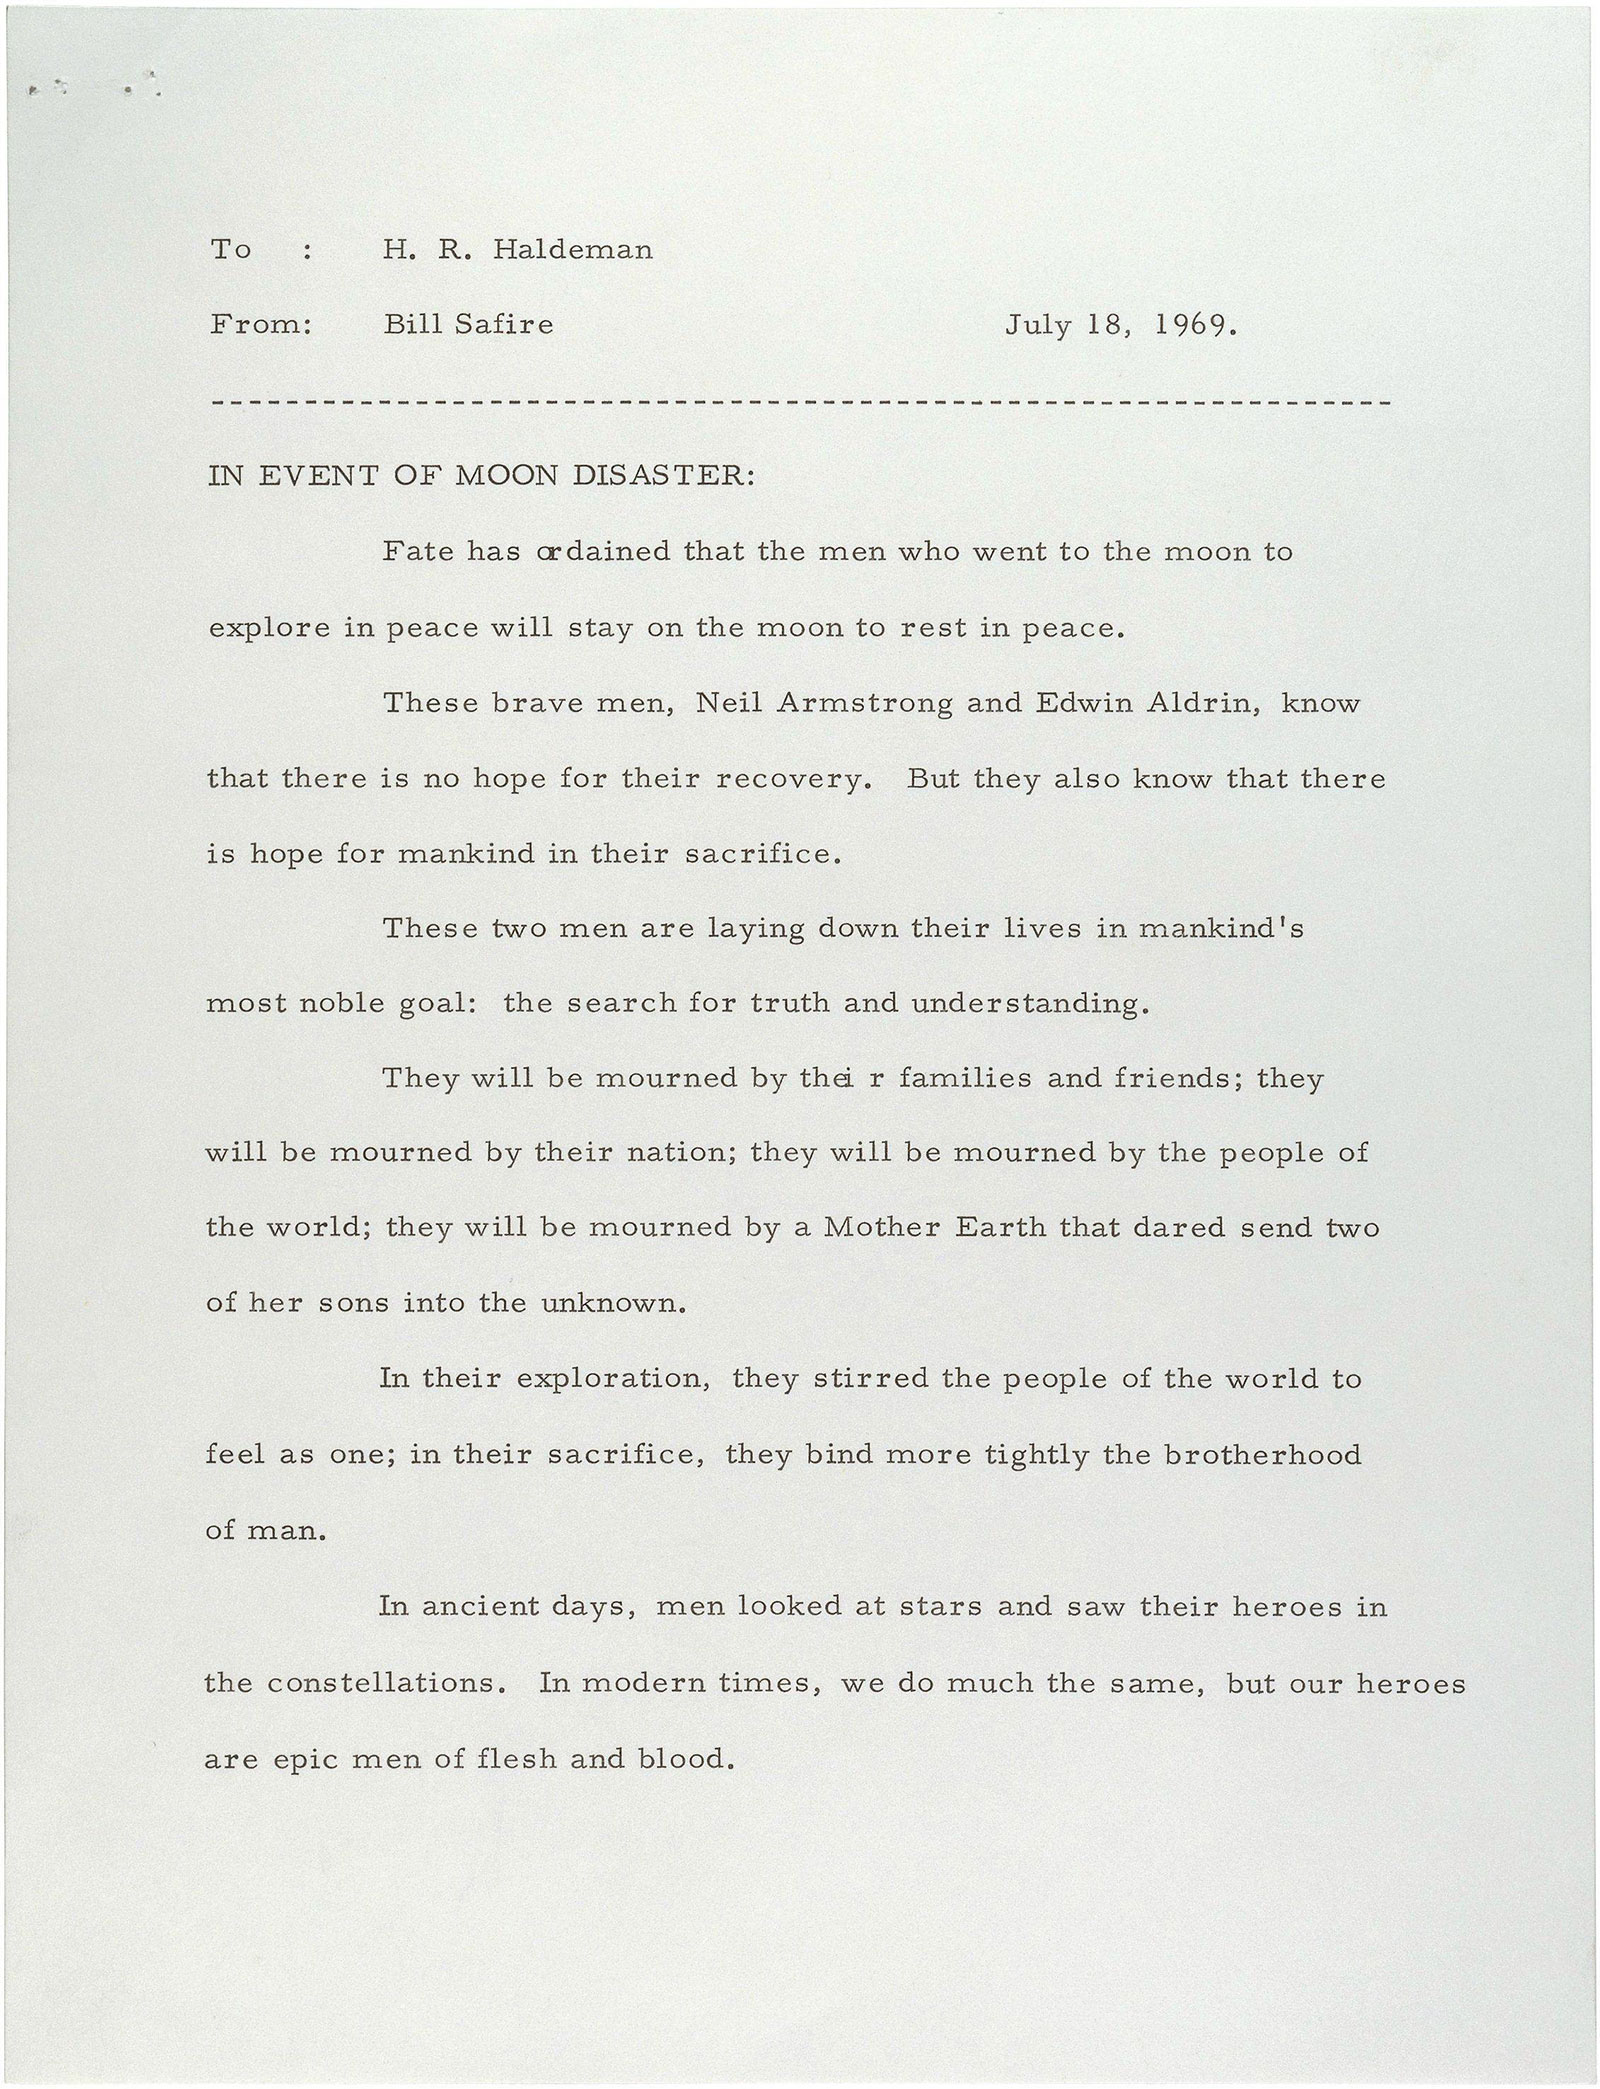 The official statement by President Nixon to be read in case the astronauts were stranded on the Moon  July 18, 1969